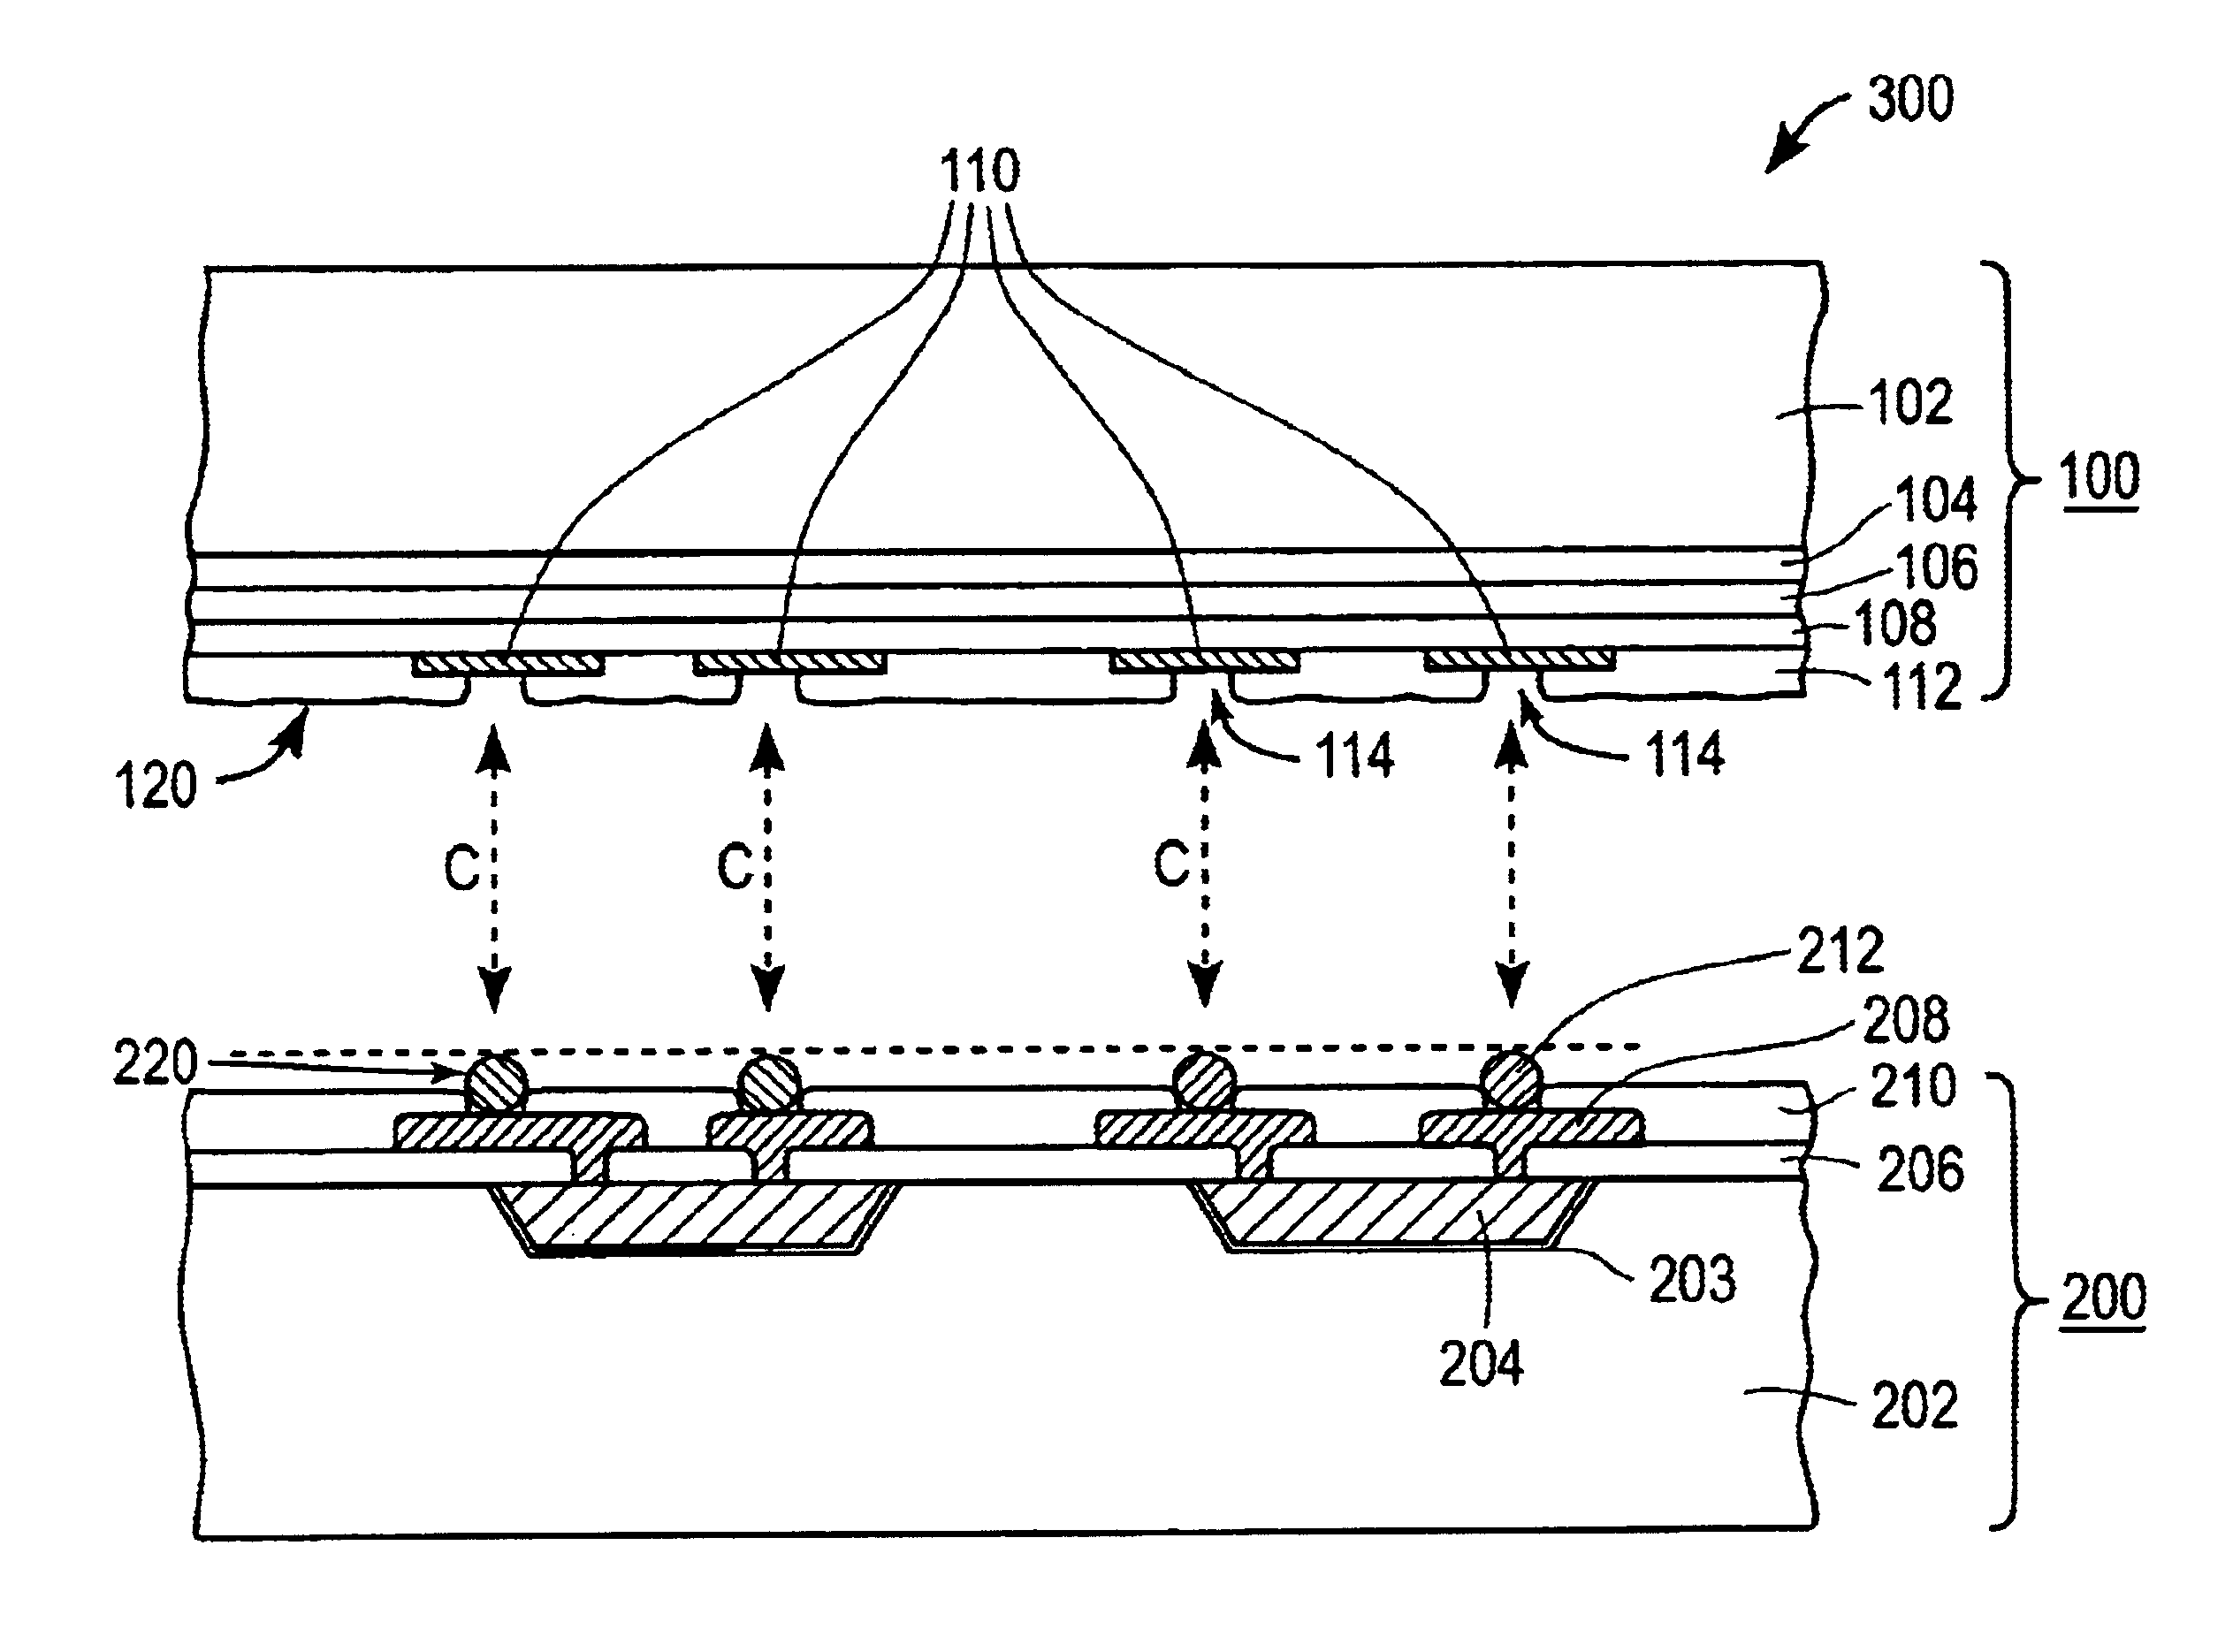 Split-fabrication for light emitting display structures